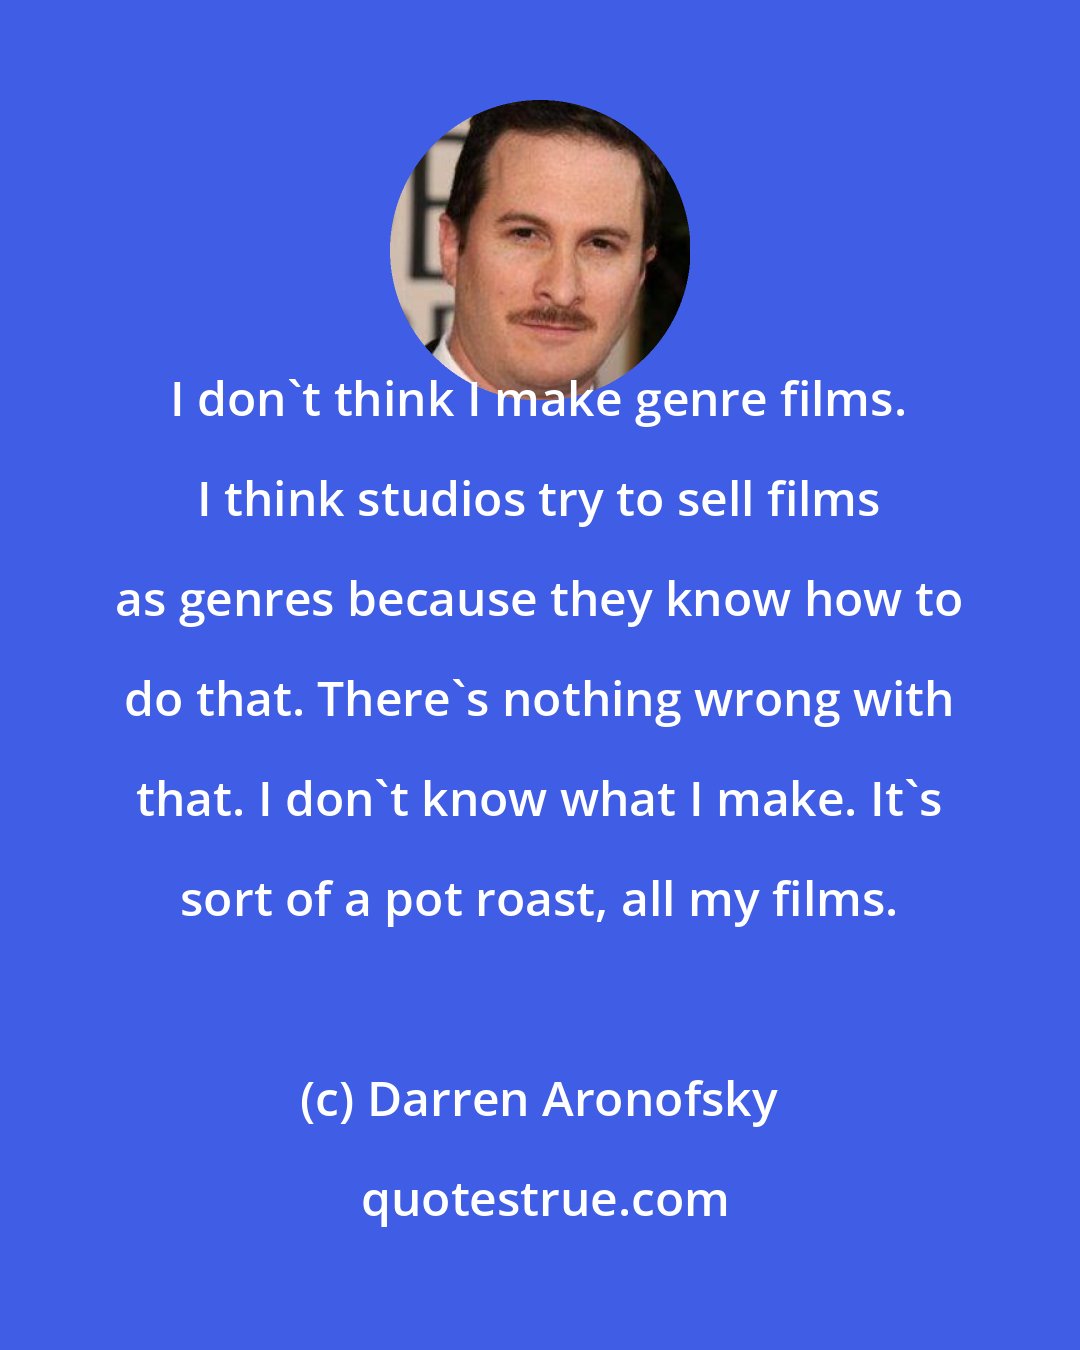 Darren Aronofsky: I don't think I make genre films. I think studios try to sell films as genres because they know how to do that. There's nothing wrong with that. I don't know what I make. It's sort of a pot roast, all my films.